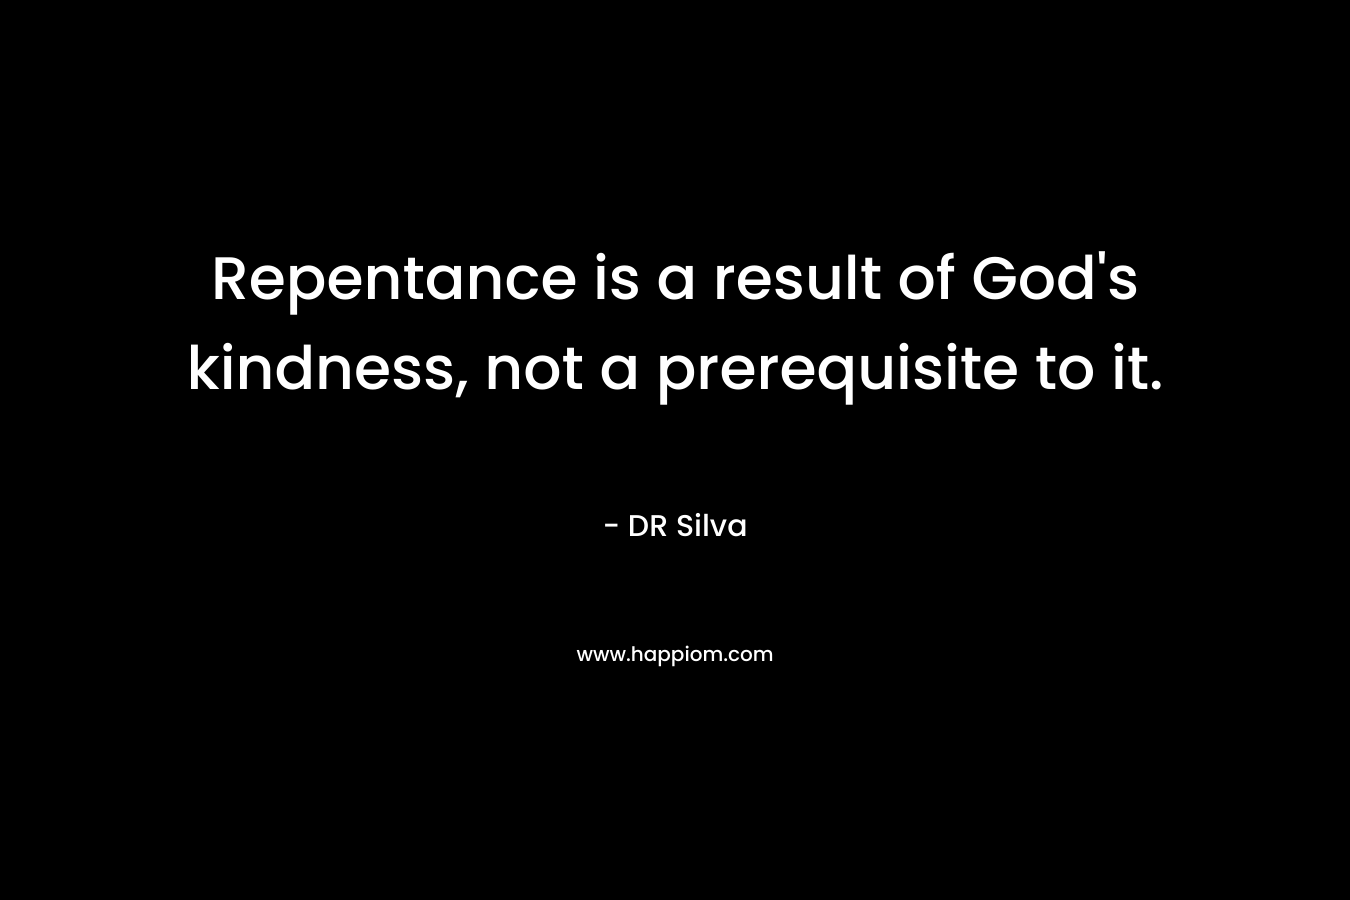 Repentance is a result of God's kindness, not a prerequisite to it.